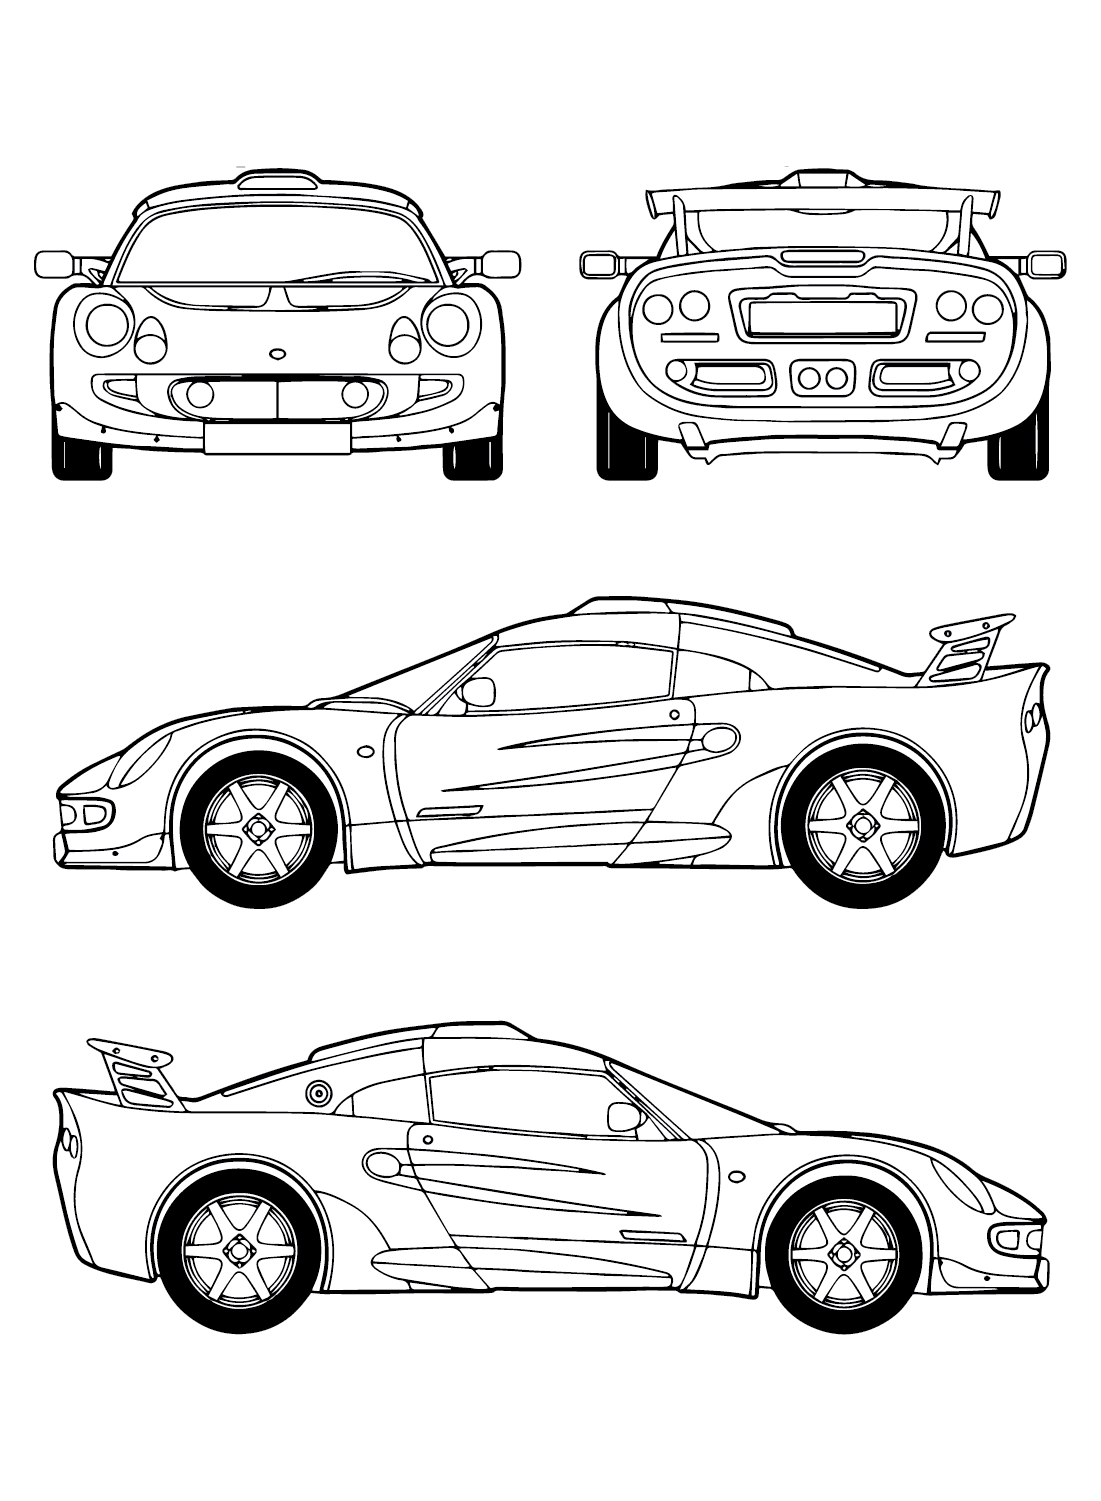 Lotus Exige Coloring Page - Free Printable Coloring Pages